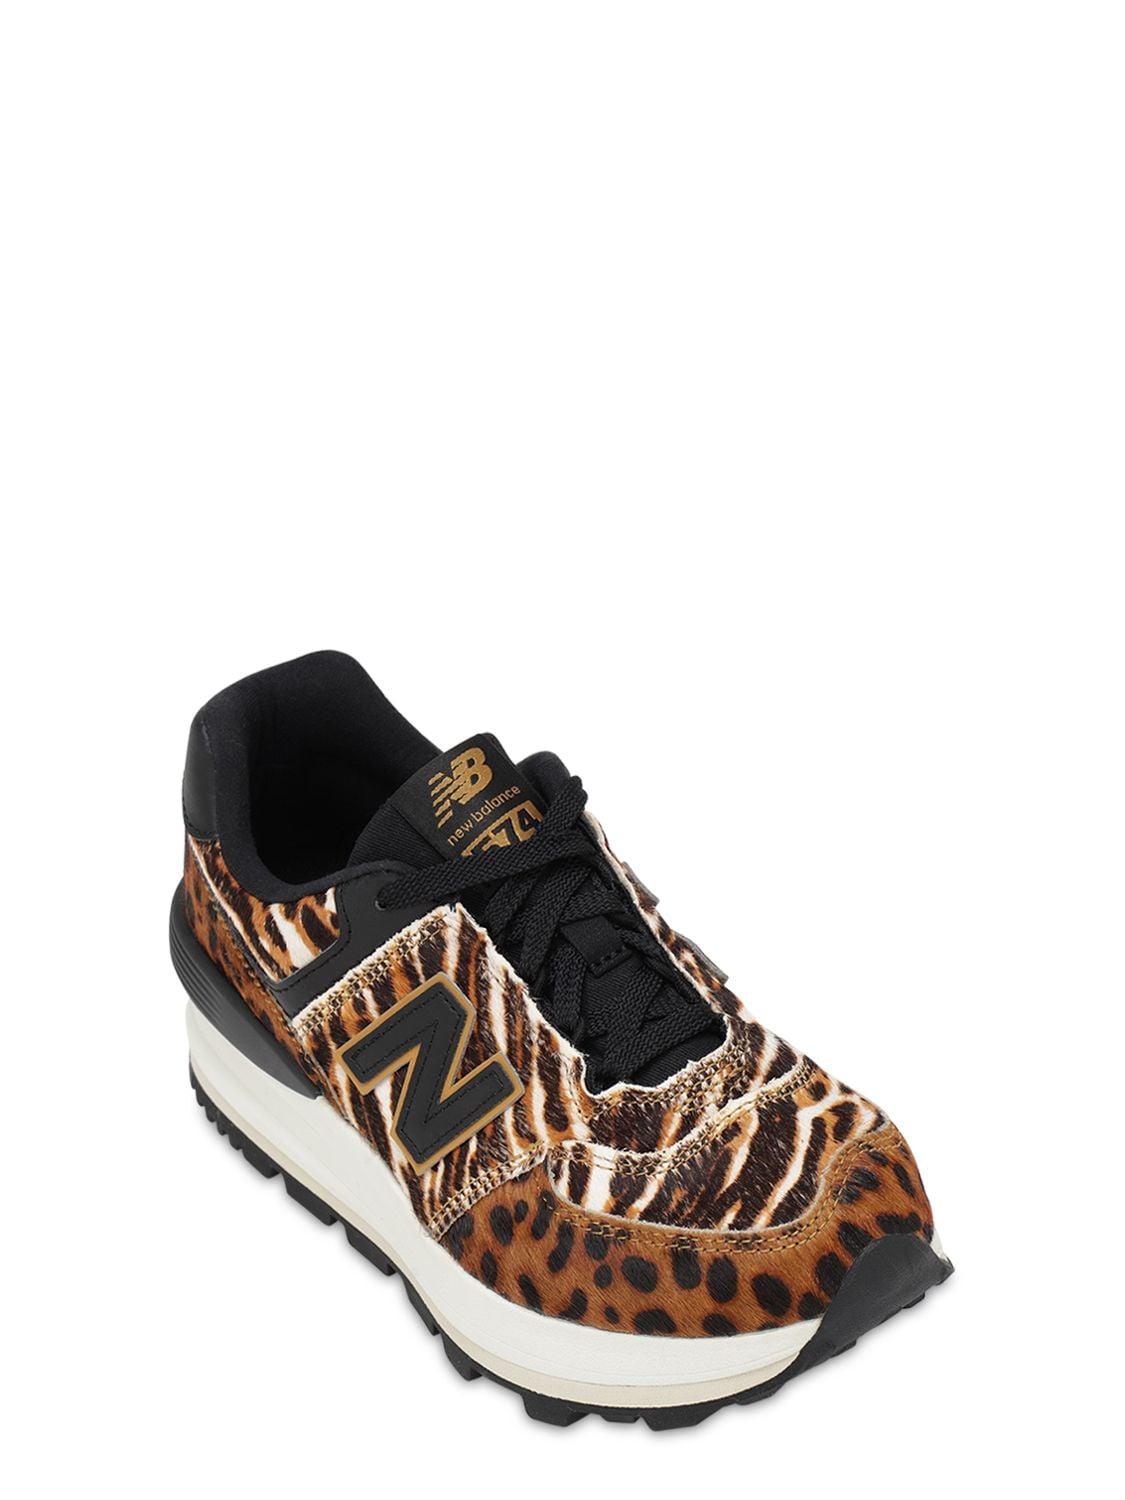 New Balance 574 Wedge in Brown | Lyst